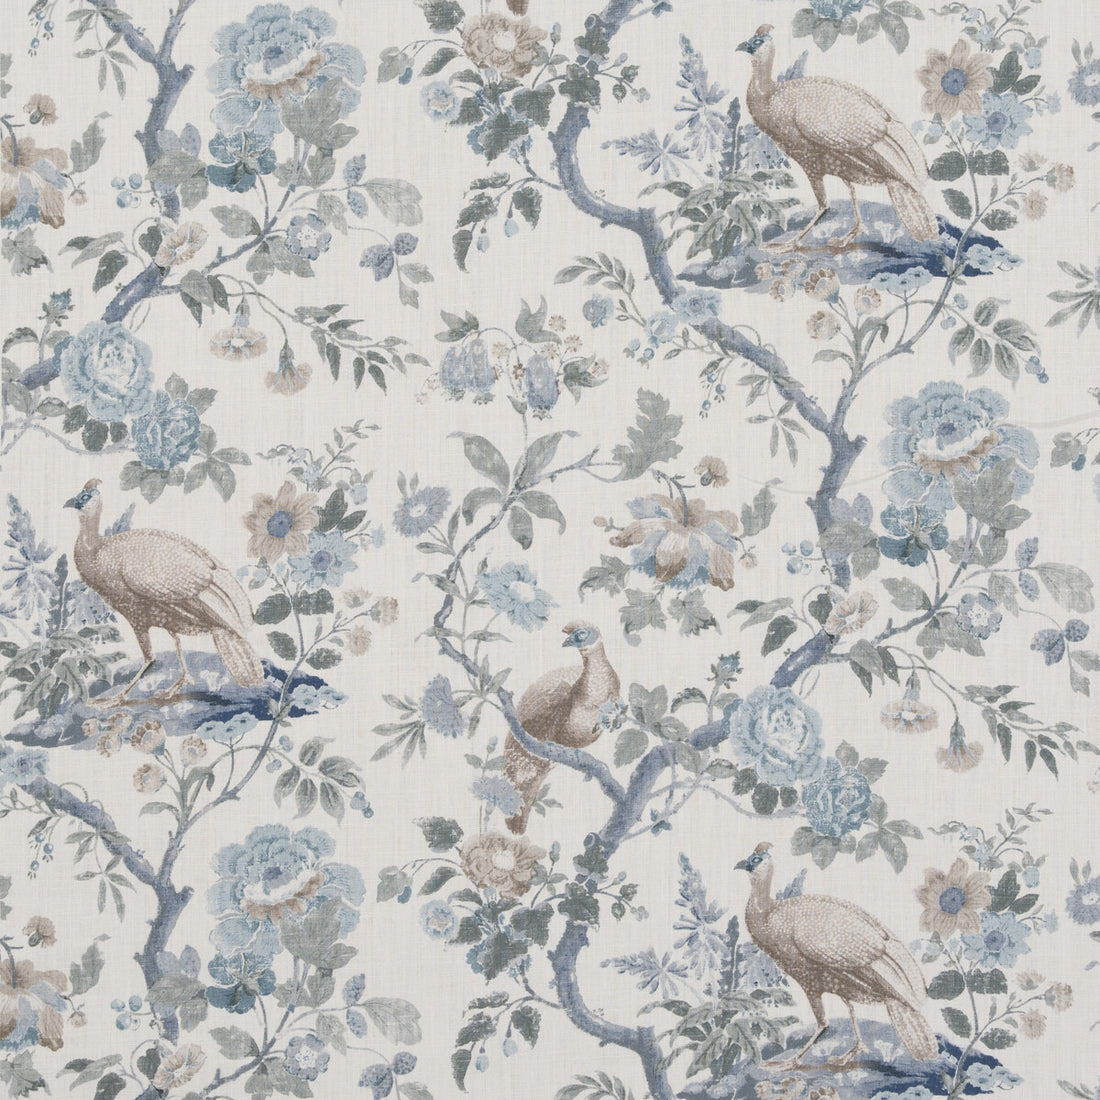 Broughton Rose fabric in blue color - pattern BP10949.1.0 - by G P &amp; J Baker in the Ashmore collection